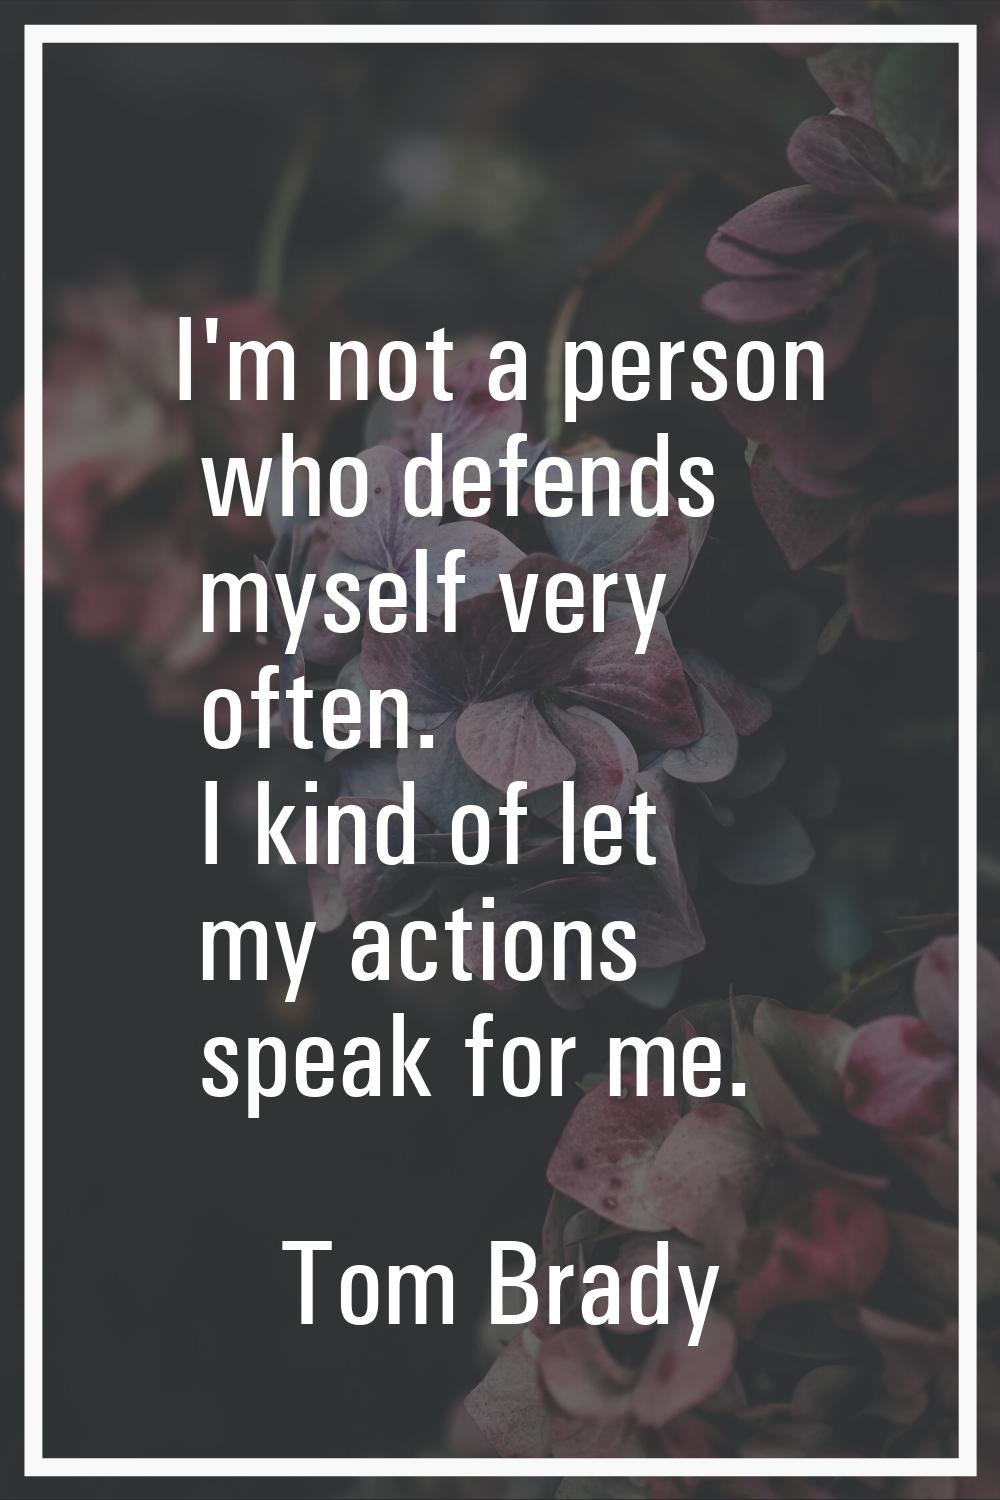 I'm not a person who defends myself very often. I kind of let my actions speak for me.